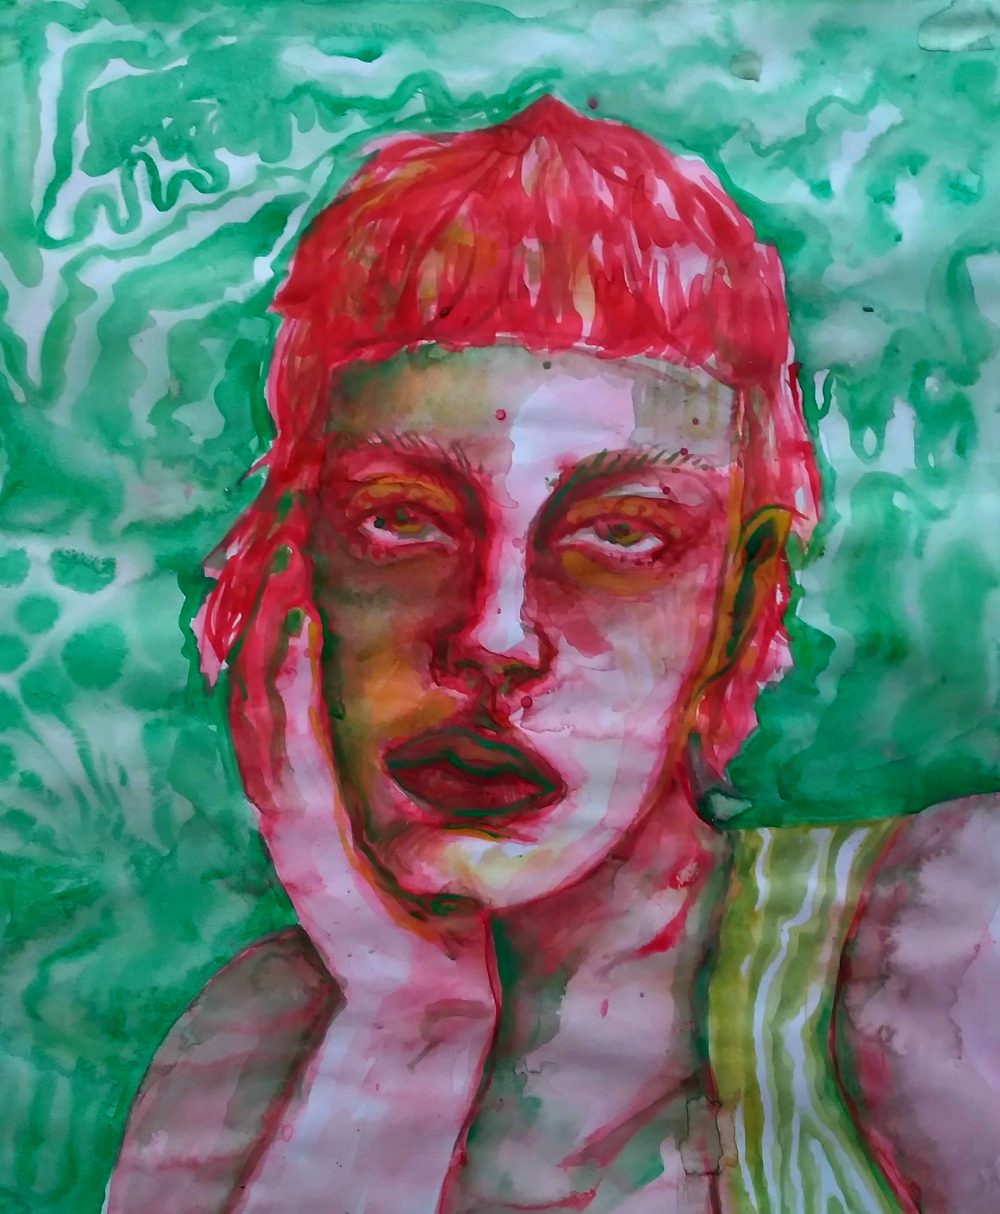 A painting in vibrant shades of magenta and green of a bored-looking person facing forward